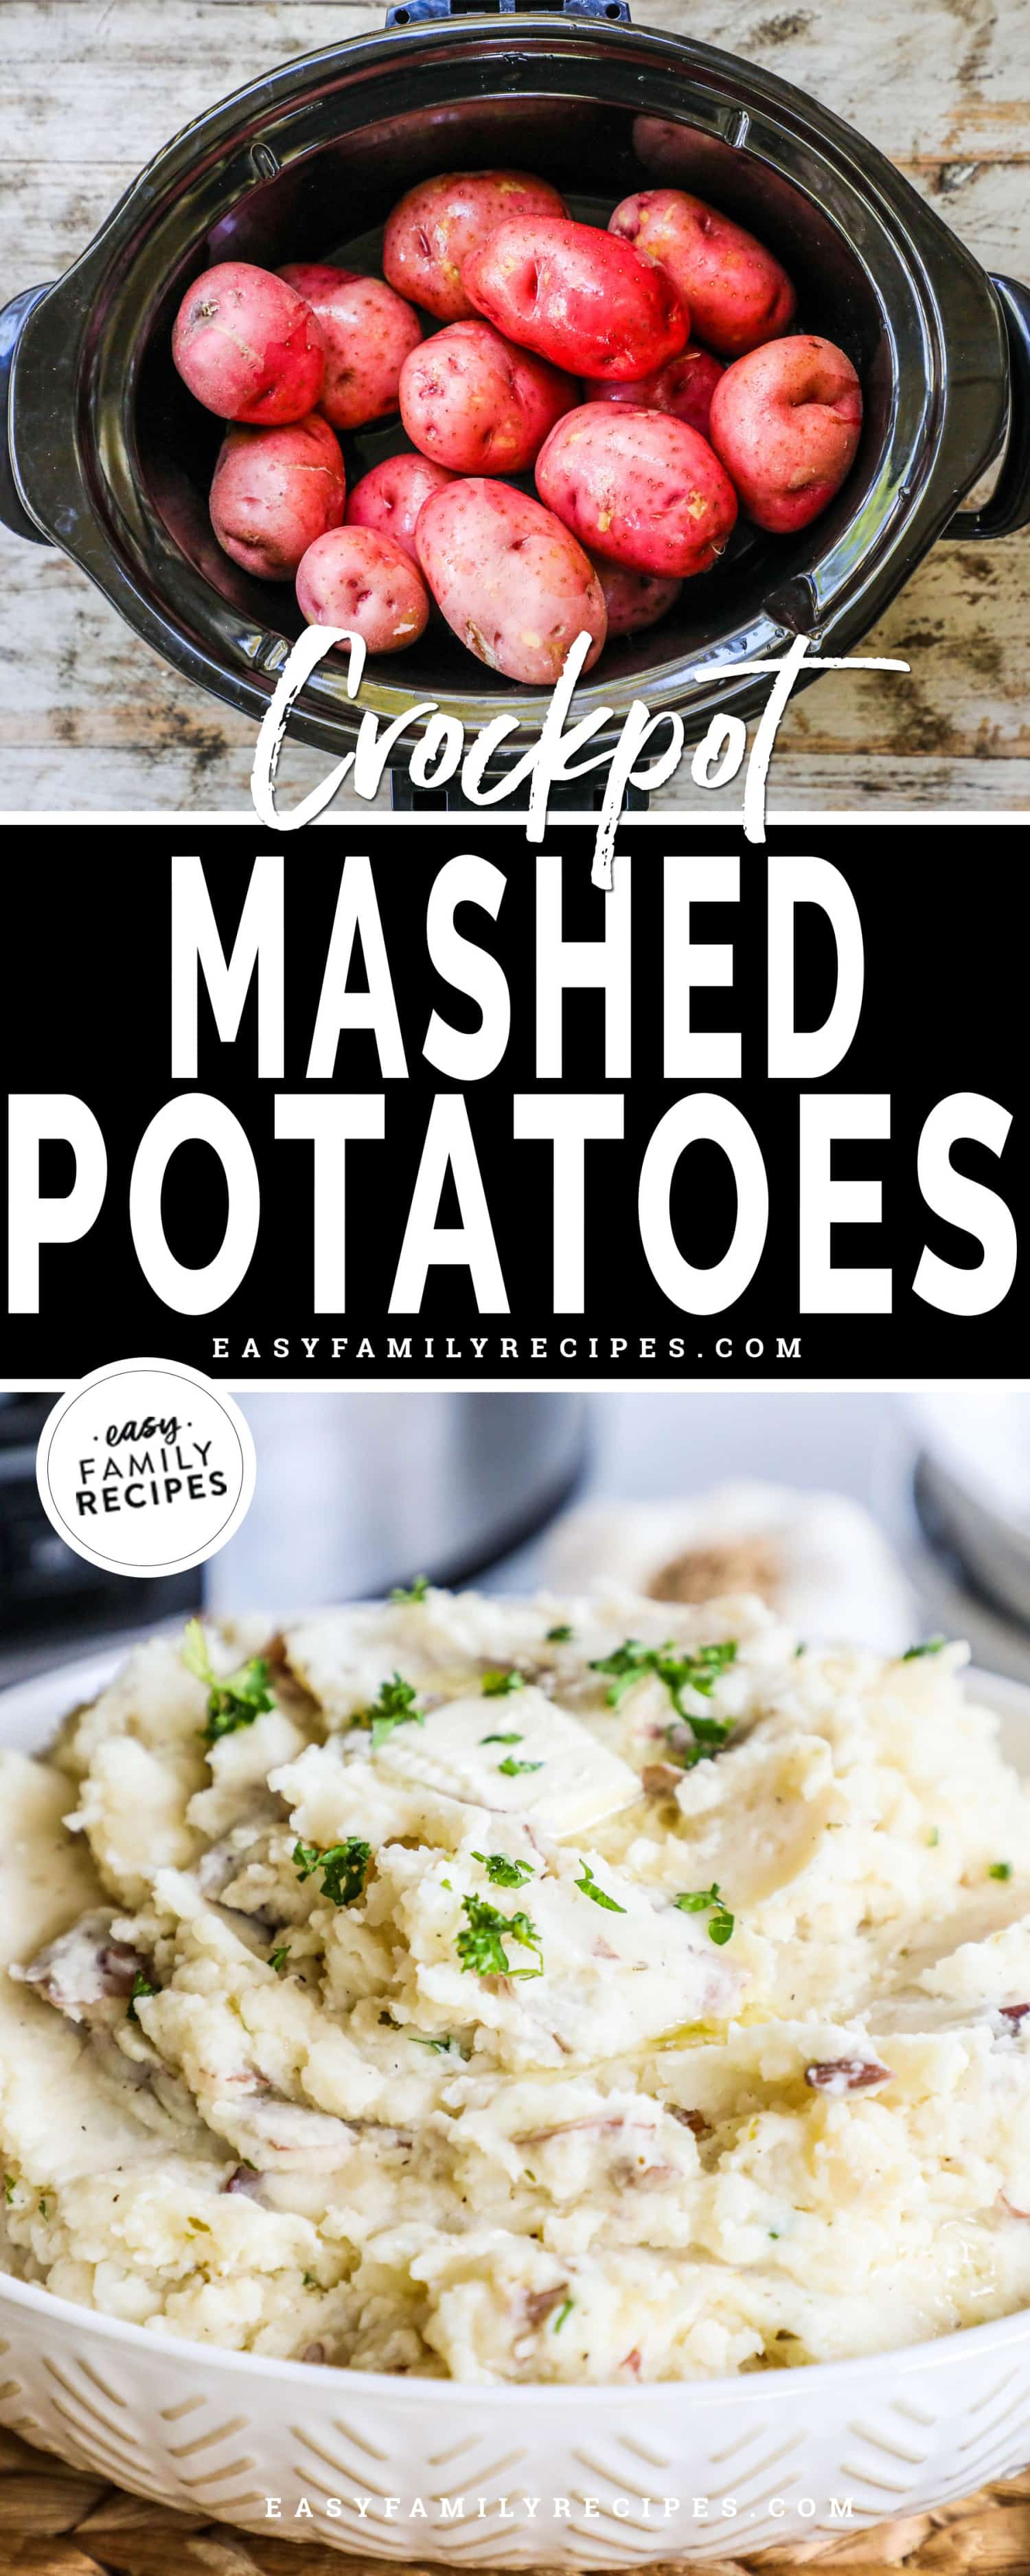 two images of potatoes, one of red potatoes in a crockpot and another with finished mashed potatoes in a bowl.